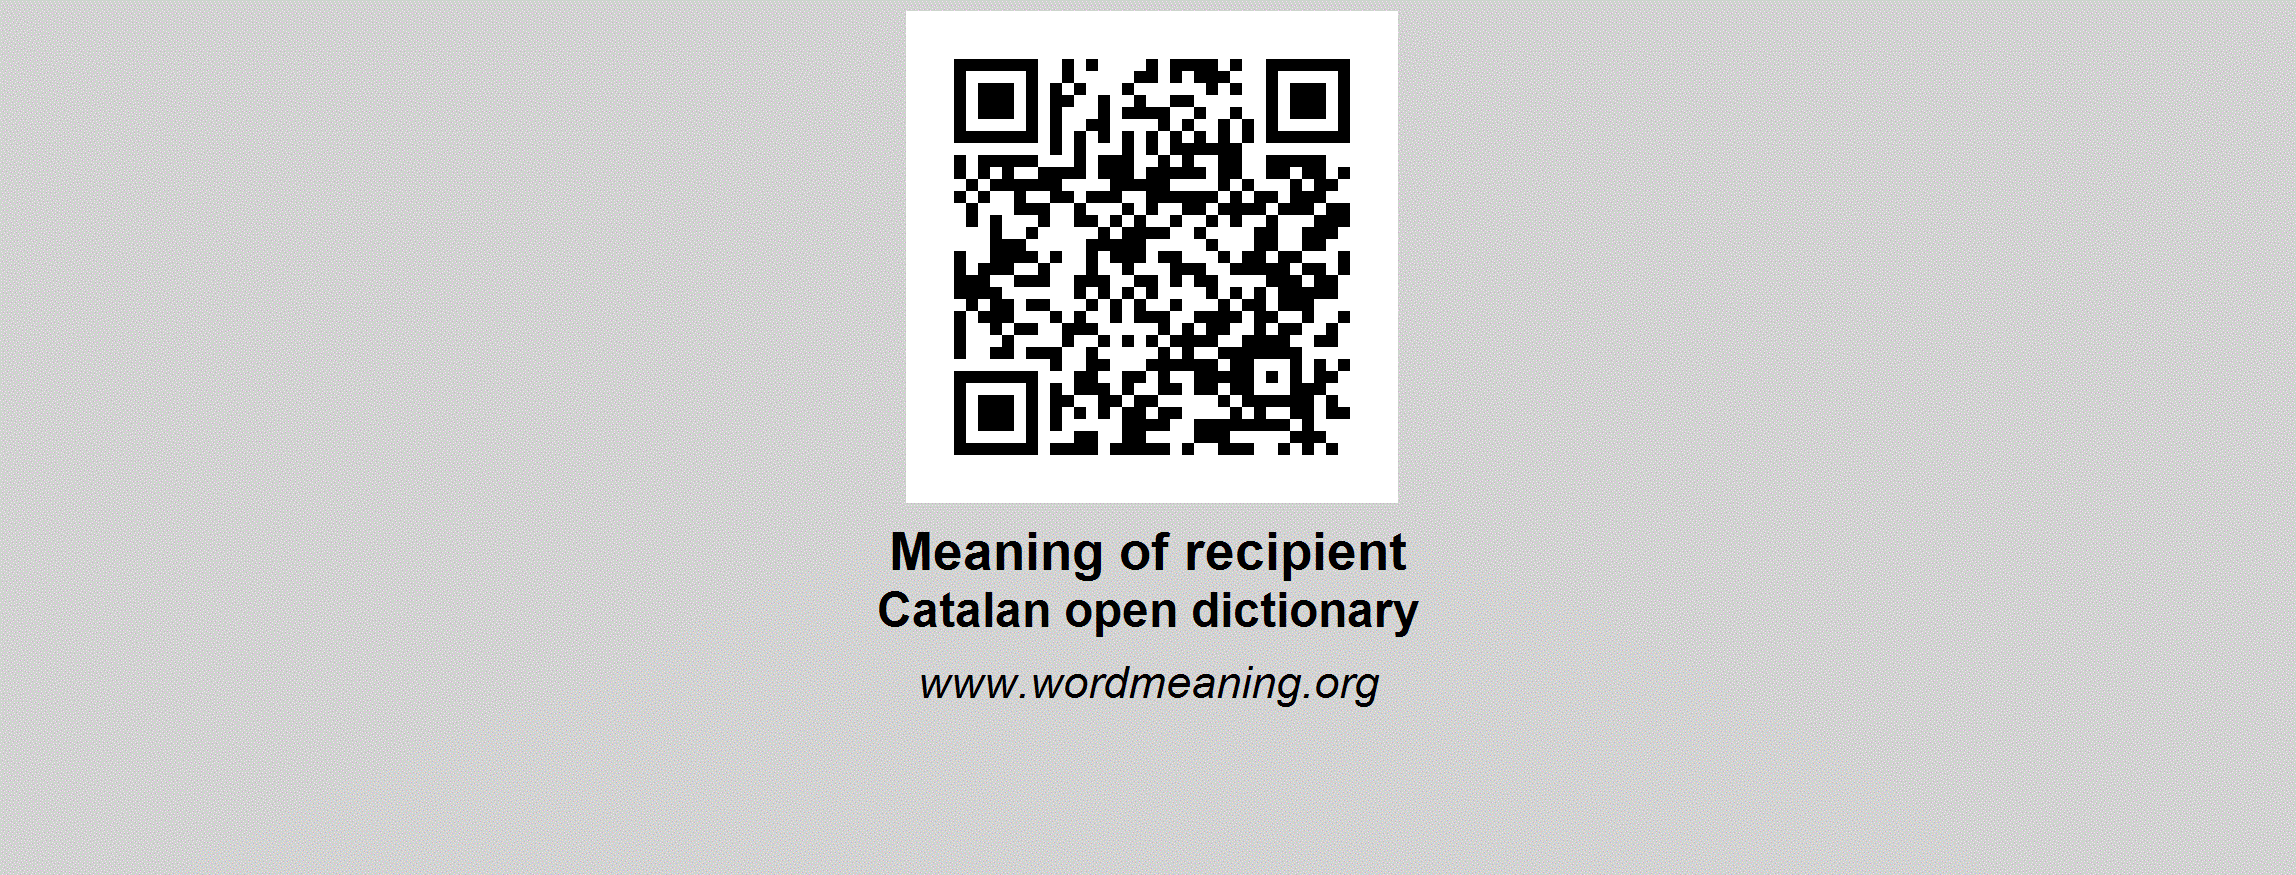 Recipient meaning